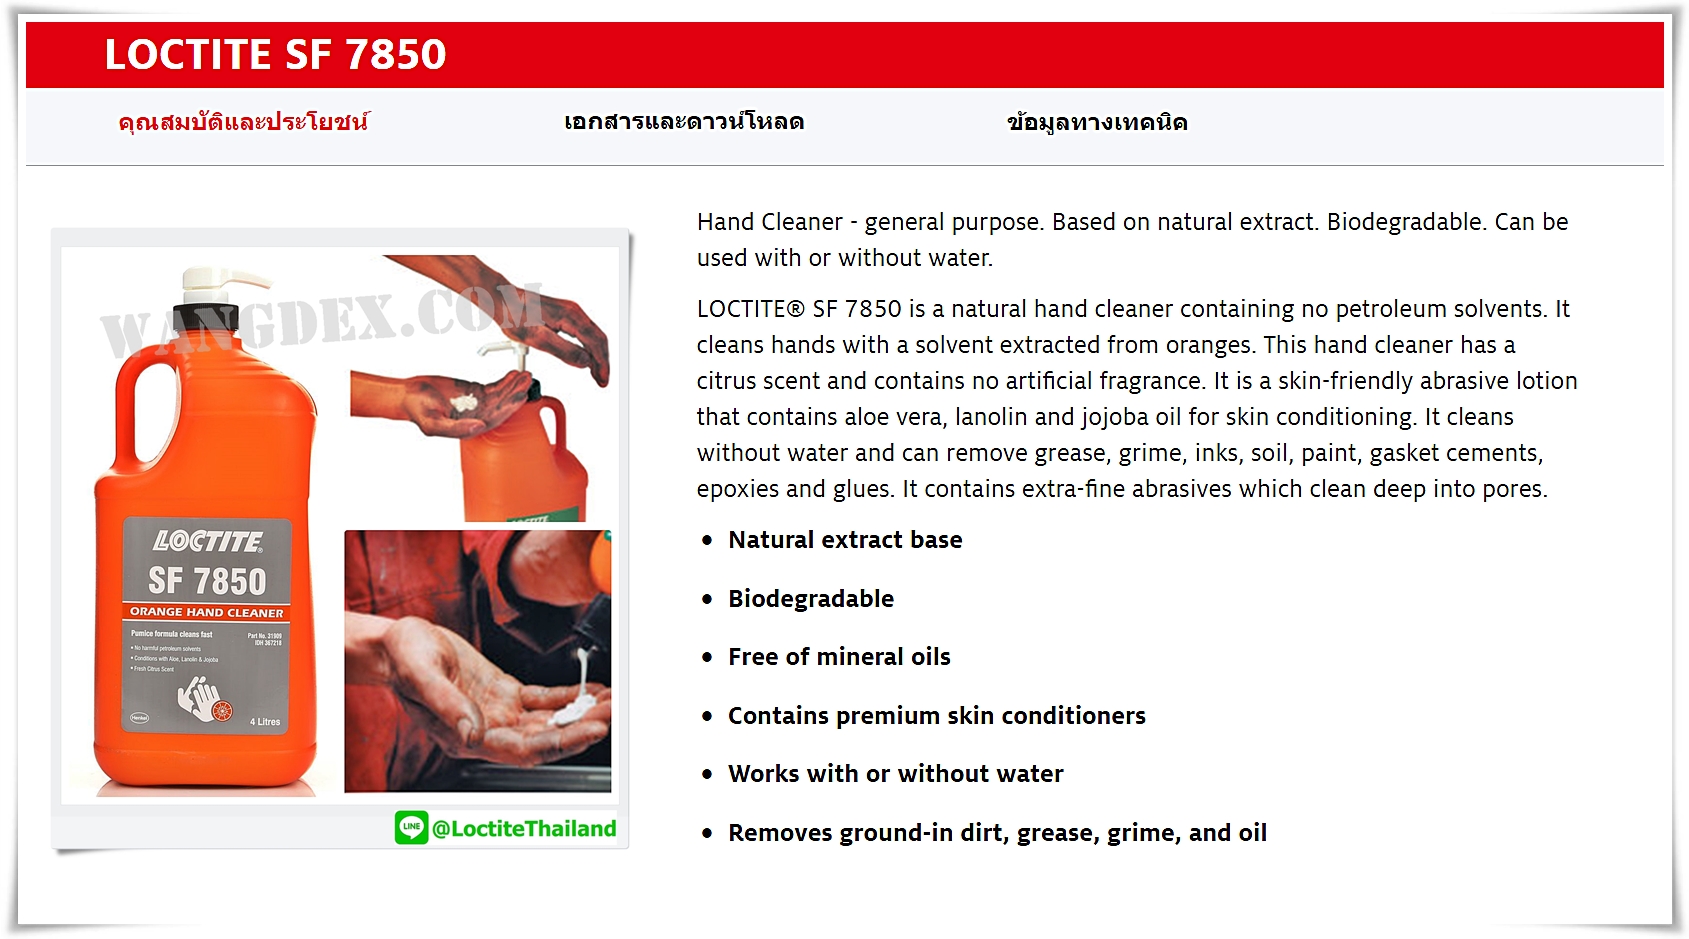 LOCTITE SF 7850 HAND CLEANER